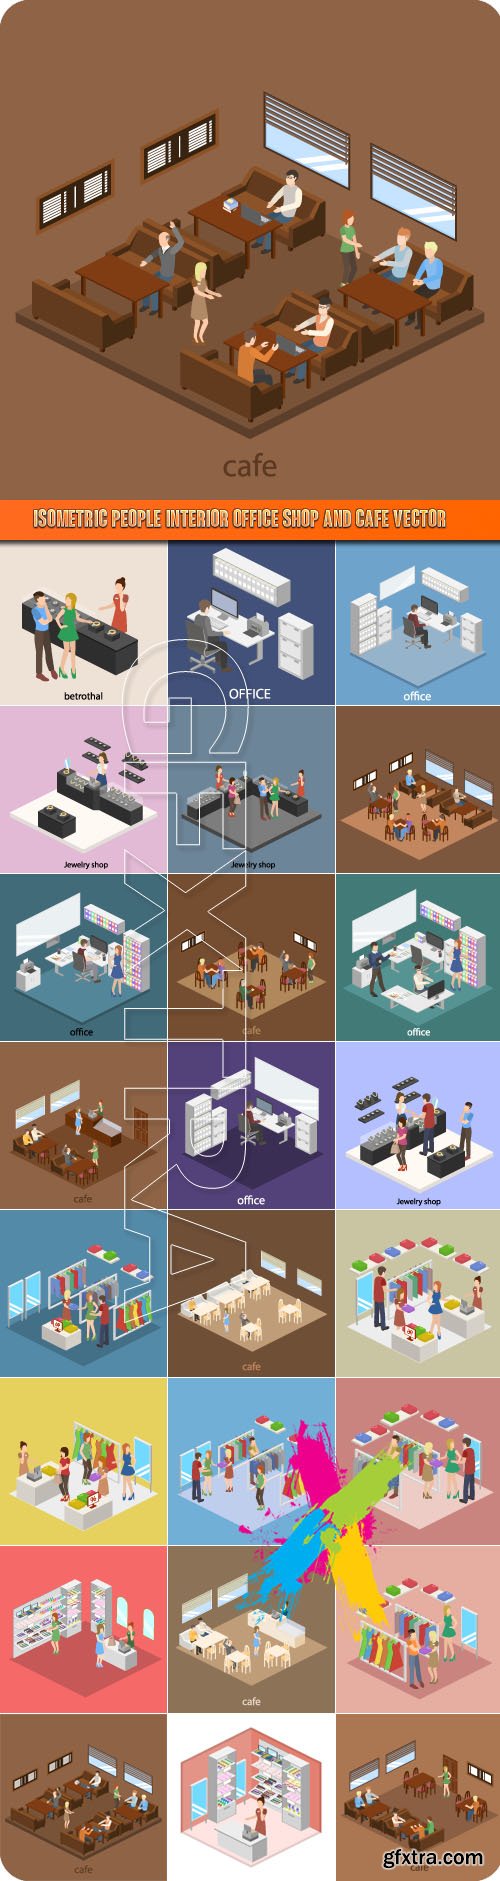 Isometric people interior office shop and cafe vector